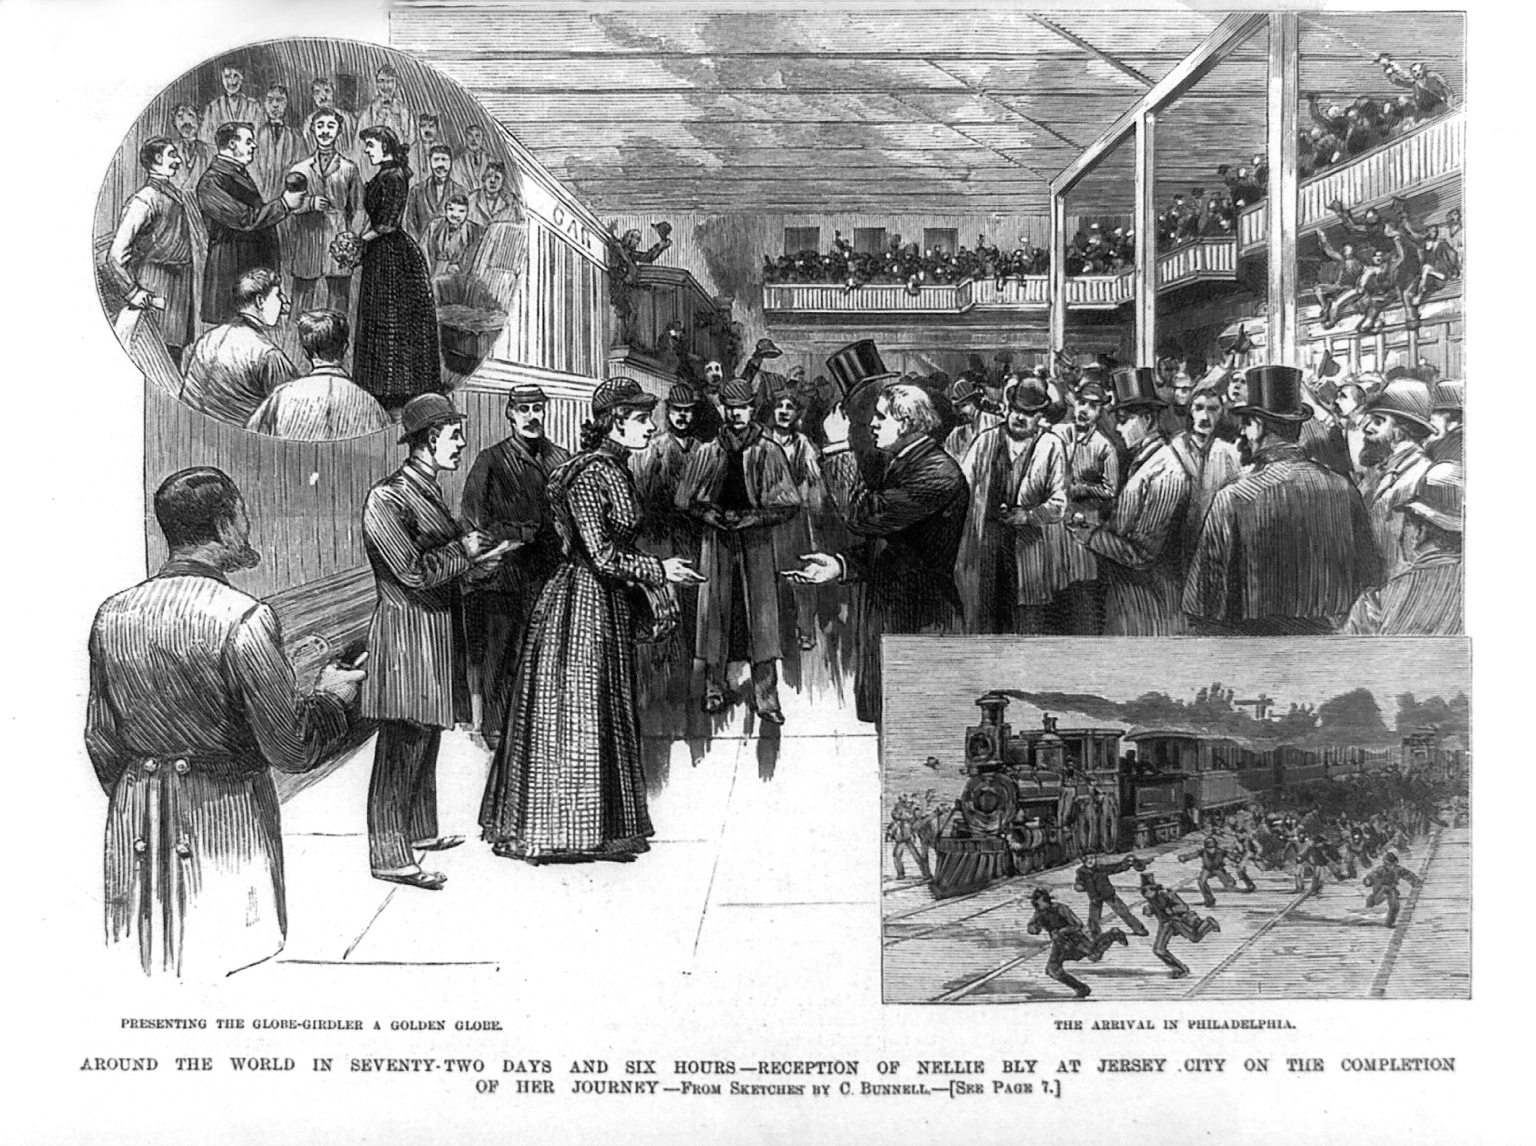 Wood engraving about the reception of Nelly Bly